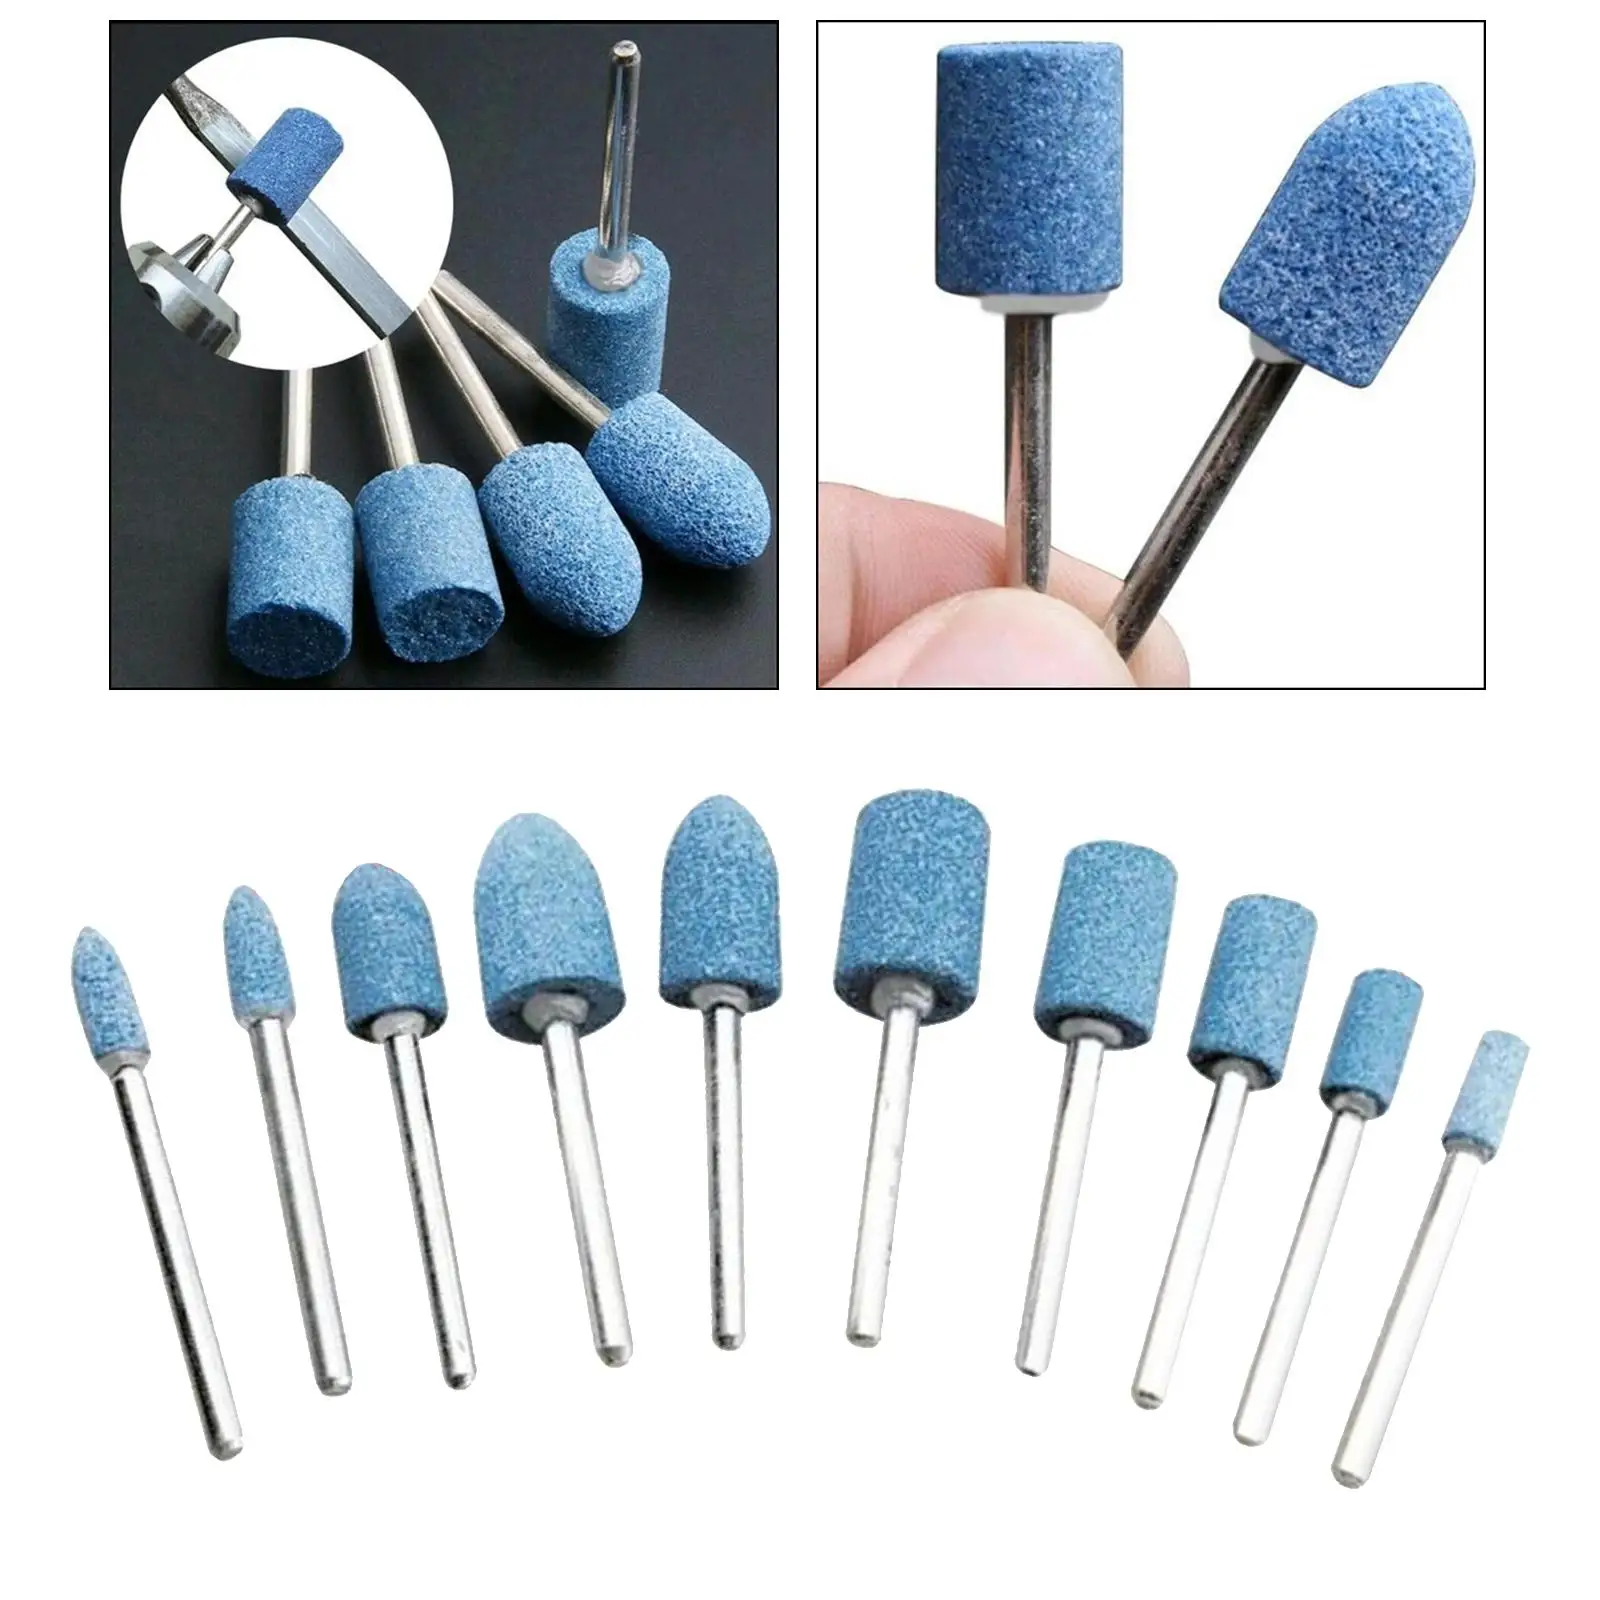 

10 Pieces 4-10mm Solid Rotary Files Bits for Die Carving Engraving Polishing Drilling Grinding Milling Cutting